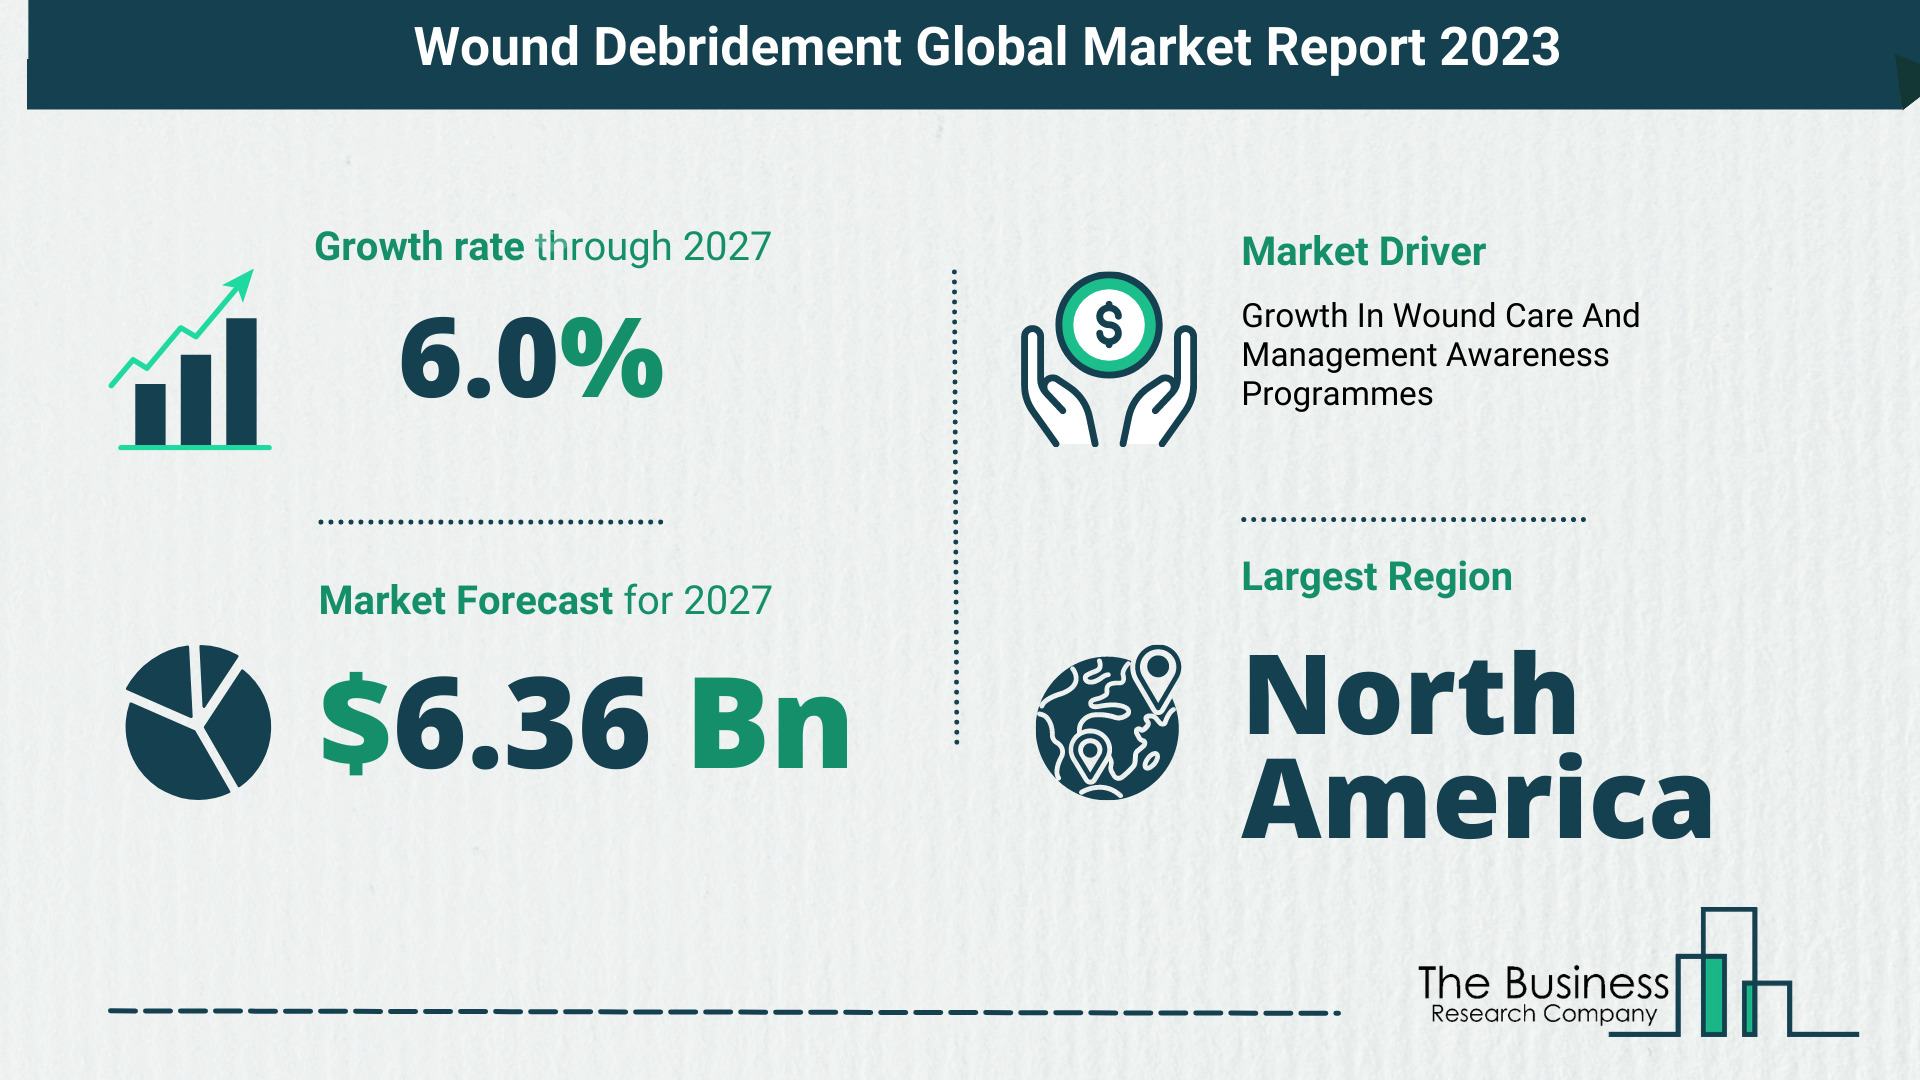 Overview Of The Wound Debridement Market 2023: Size, Drivers, And Trends